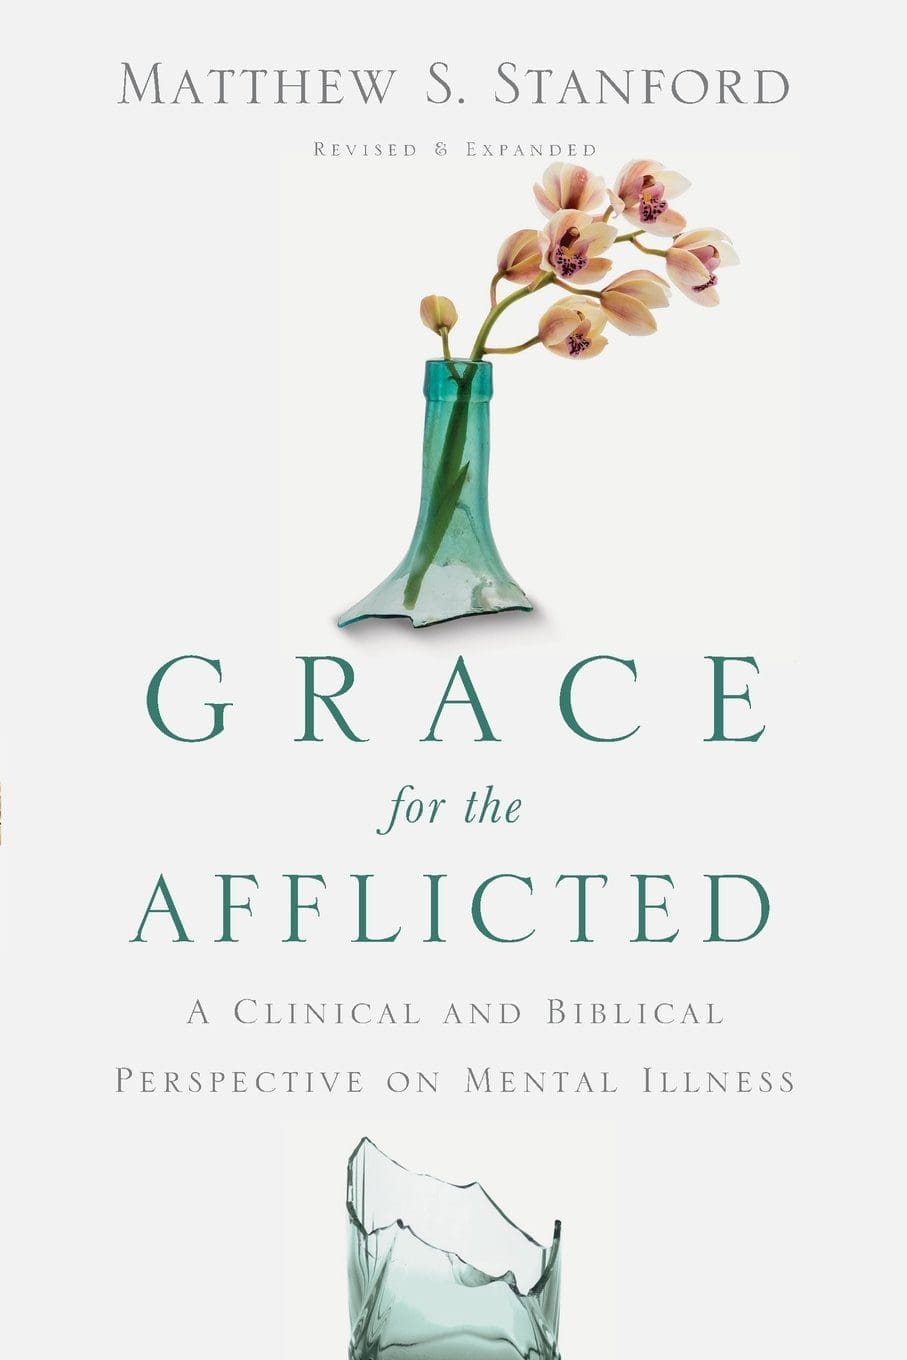 Grace for the Afflicted- A Clinical and Biblical Perspective on Mental Illness